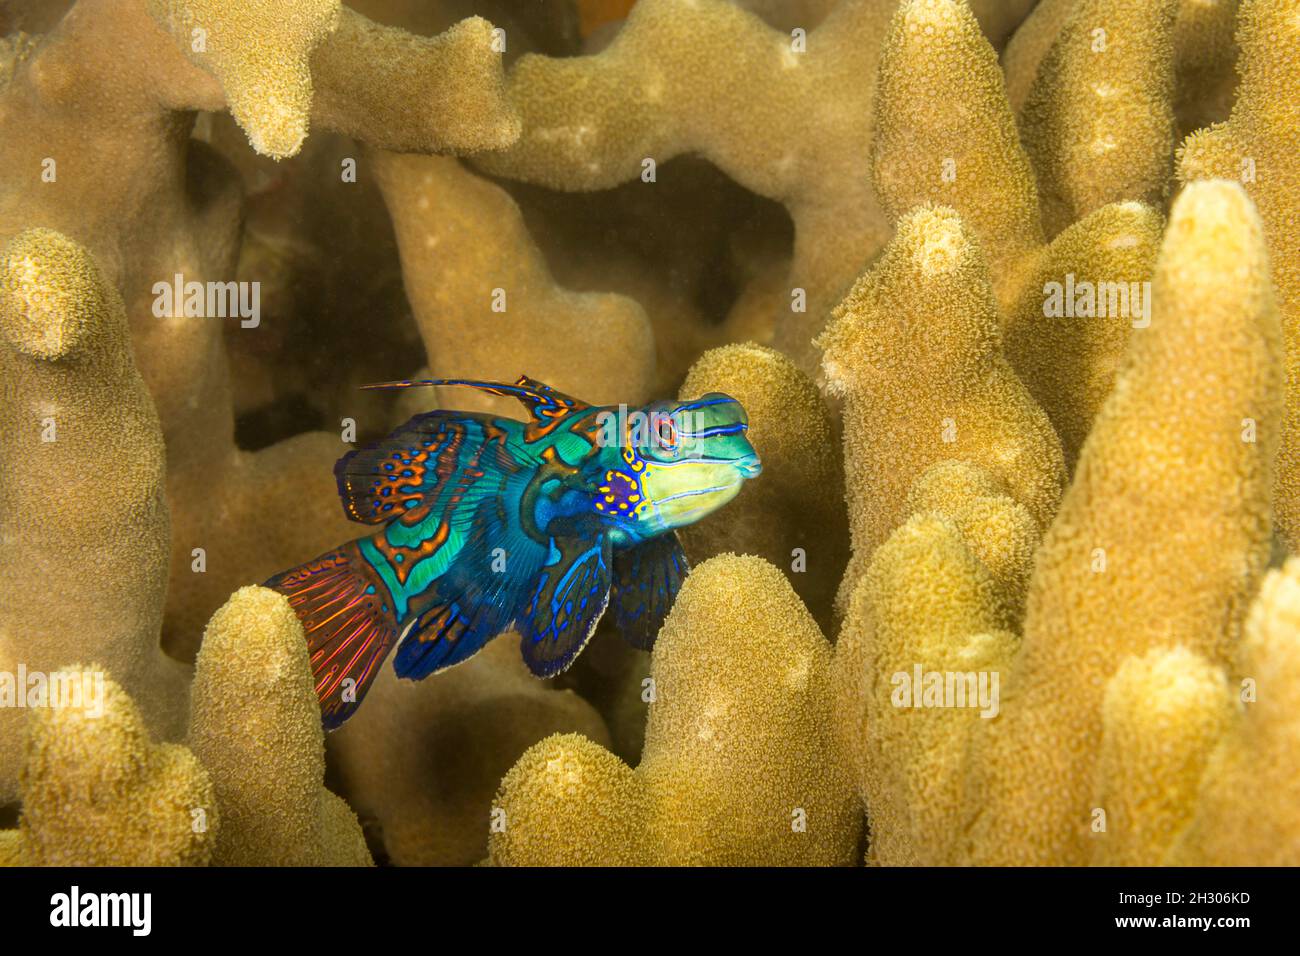 At dusk mandarinfish, Synchiropus splendidus, look for a mate and leave the protection of the finger coral where they are found, Yap, Micronesia. Stock Photo